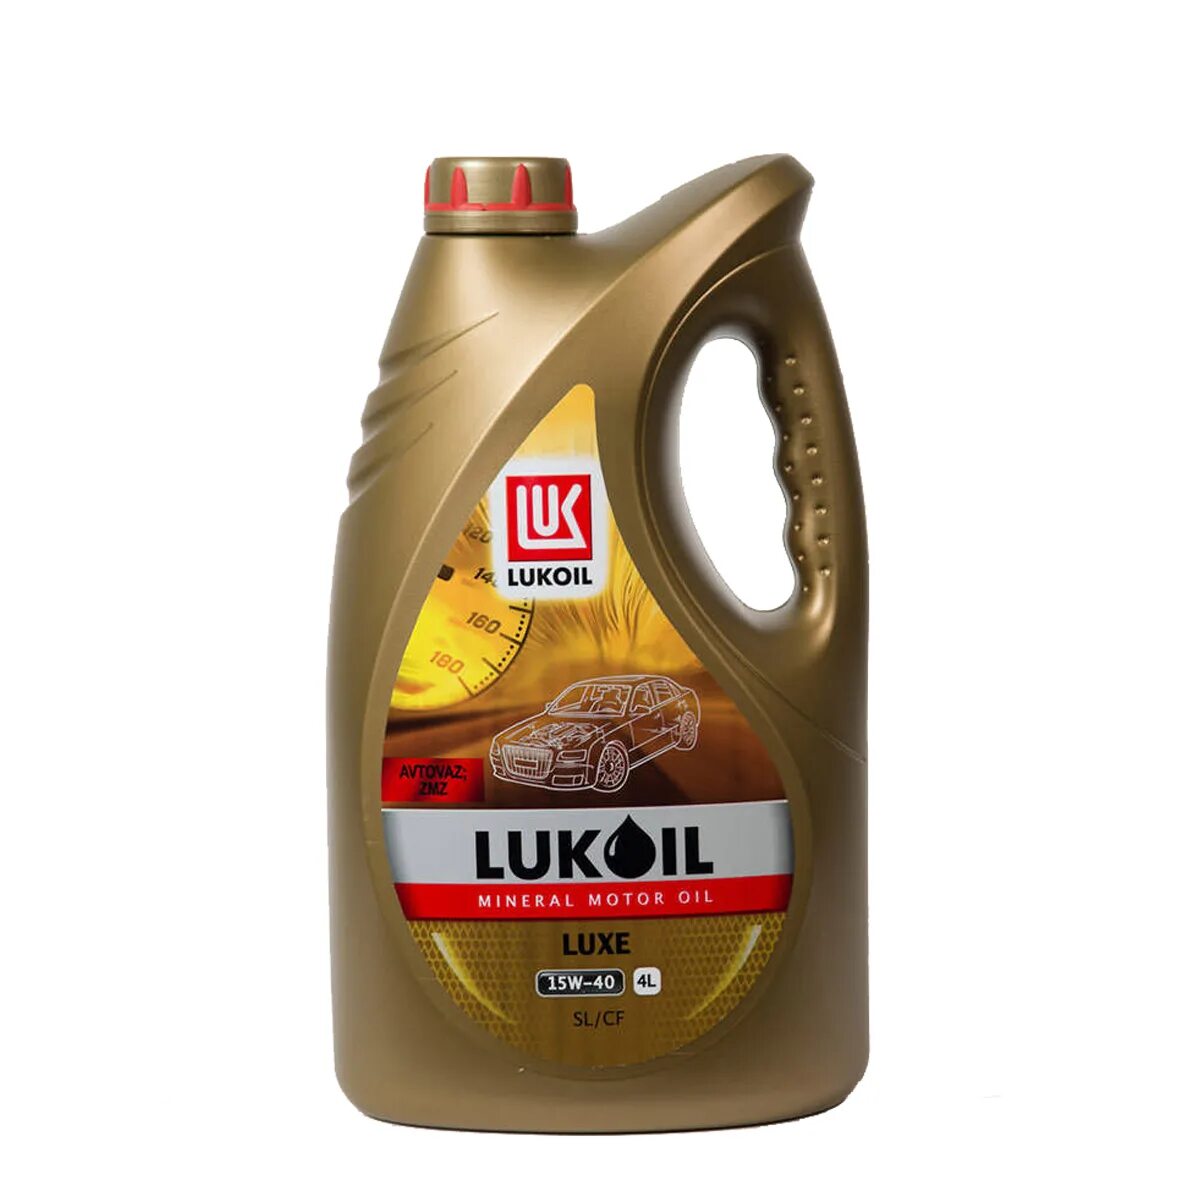 Lukoil Luxe 15w-40. Лукойл Люкс 10w30. Lukoil. Sae15w40. Масло Luxe 15w40 минеральное. Моторные масла cj 4